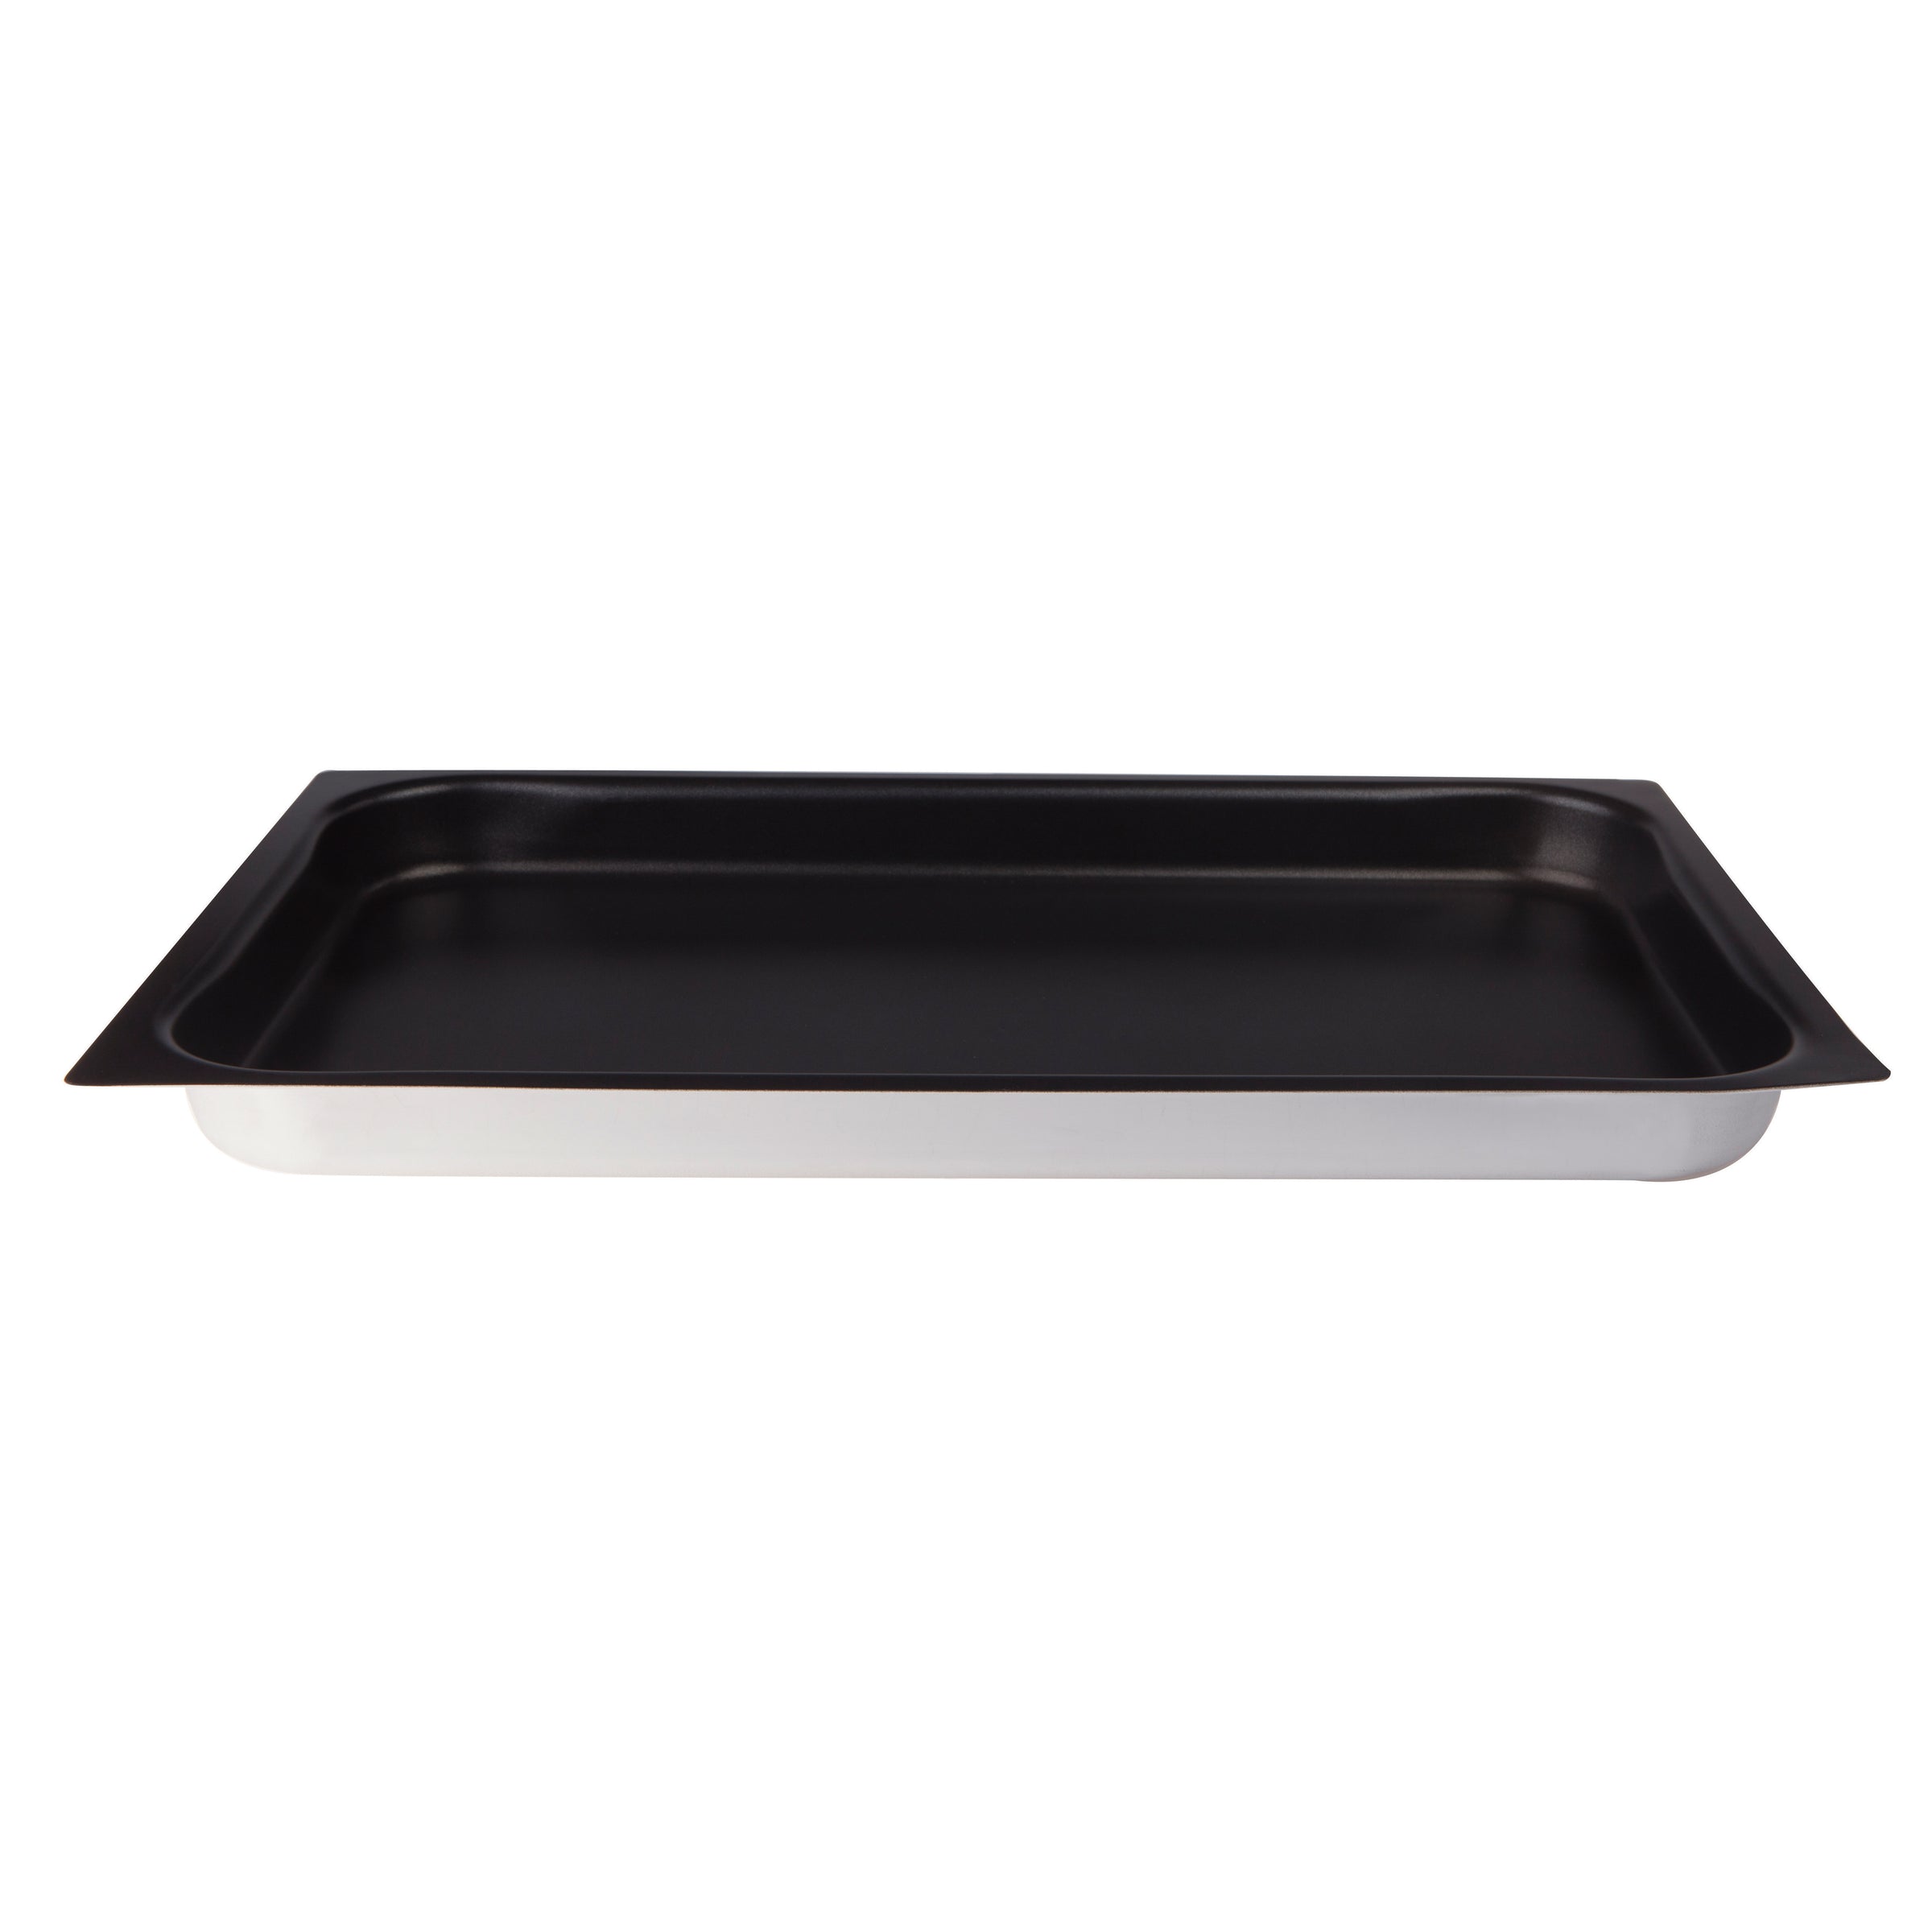 Agnelli Gastronorm Aluminum Nonstick Baking Sheet, 20.8 x 12.8-Inches